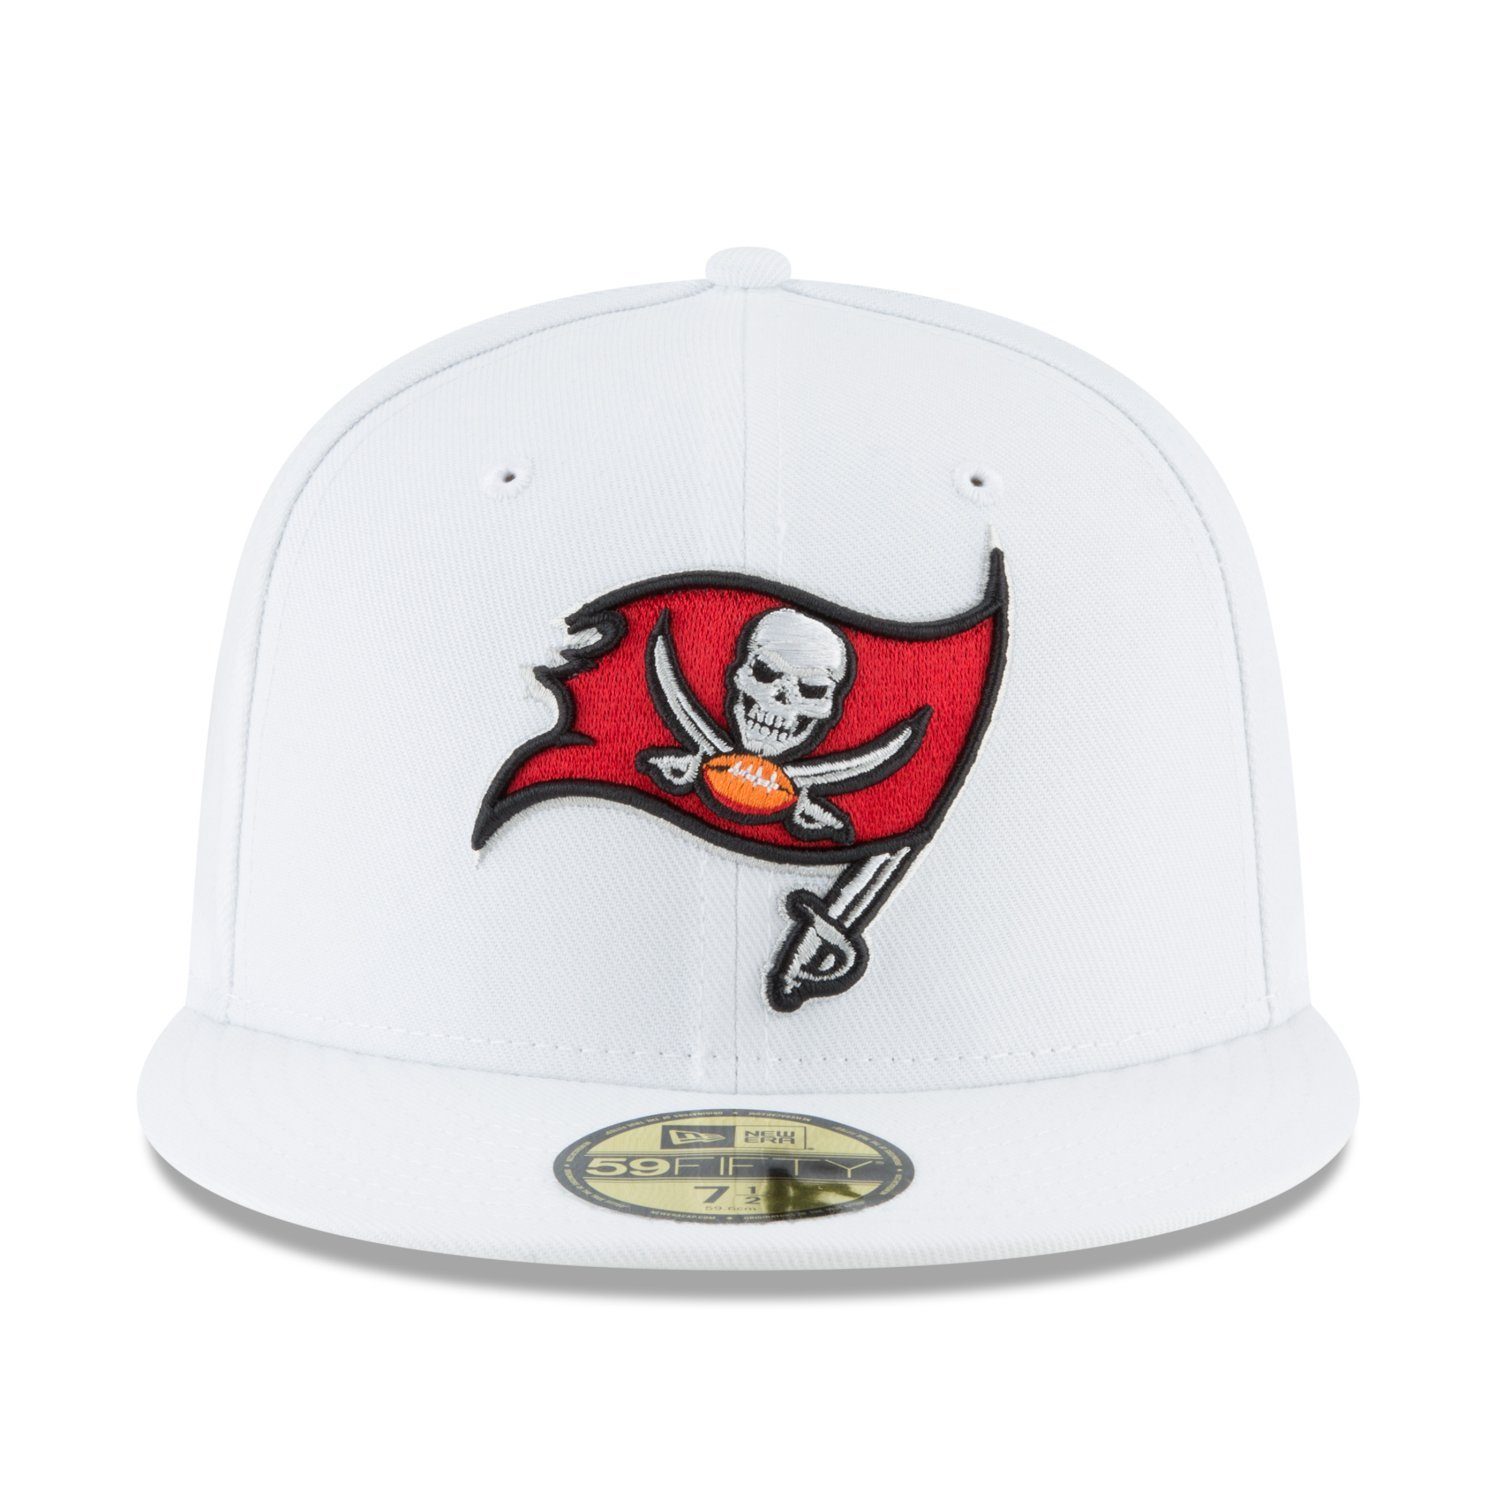 New Era Fitted Cap Buccaneers NFL Bay Tampa 59Fifty